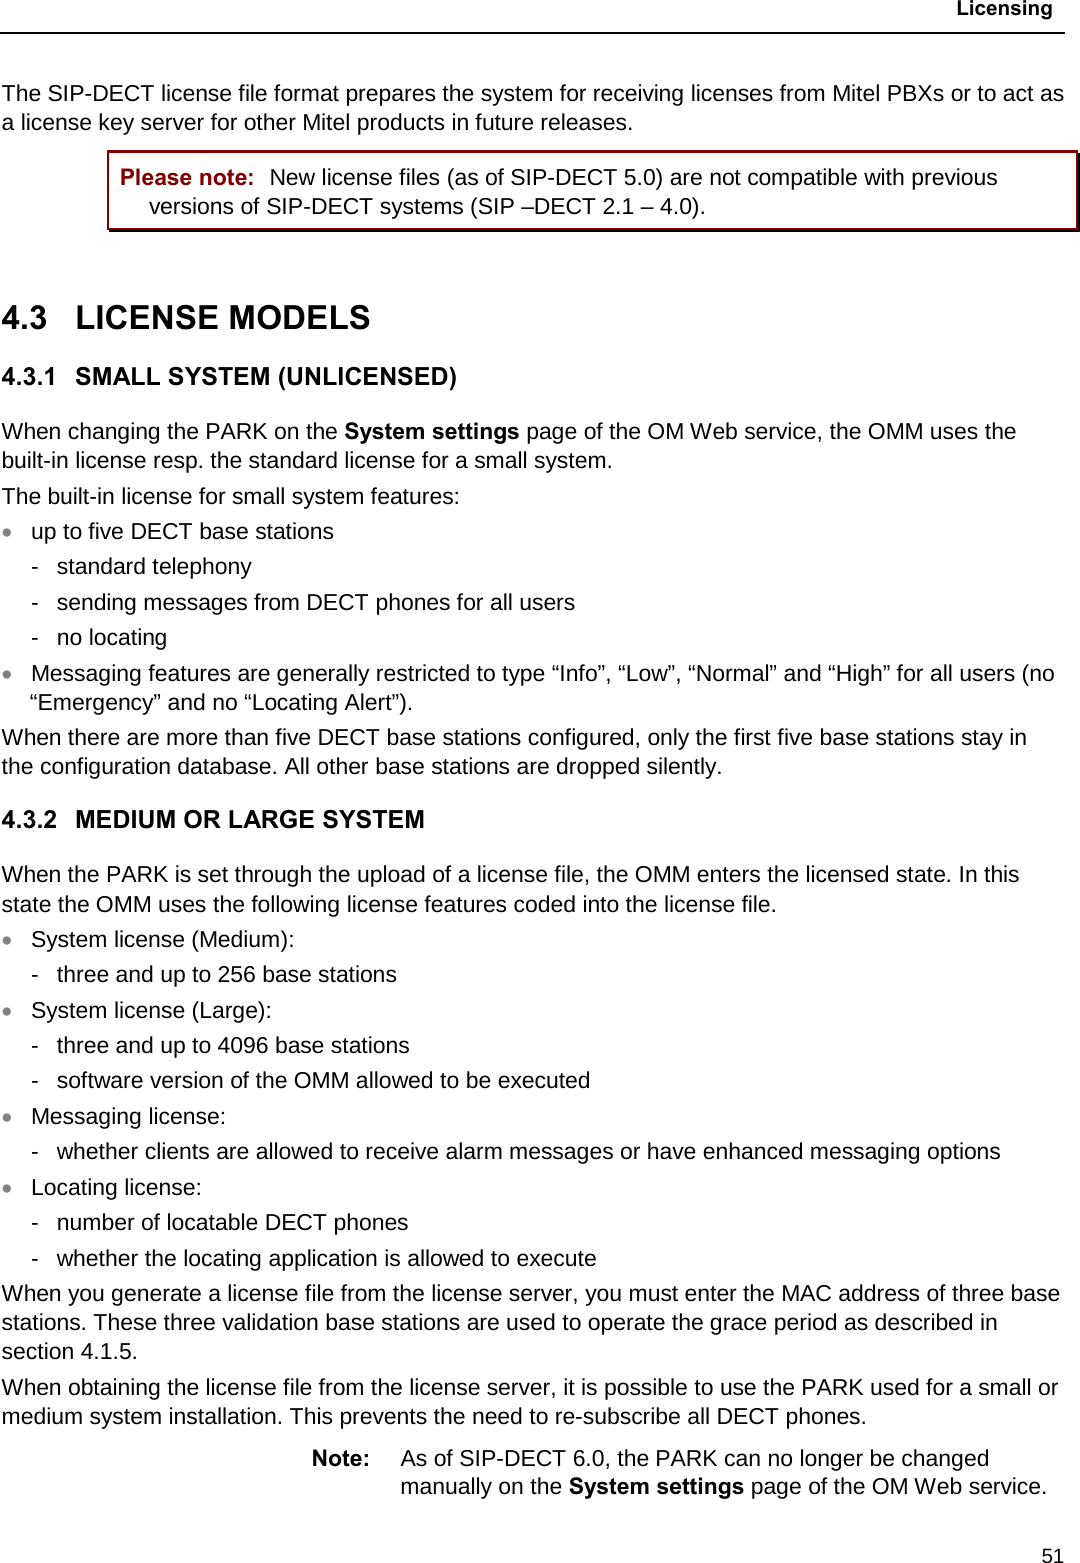  Licensing  51 The SIP-DECT license file format prepares the system for receiving licenses from Mitel PBXs or to act as a license key server for other Mitel products in future releases. Please note: New license files (as of SIP-DECT 5.0) are not compatible with previous versions of SIP-DECT systems (SIP –DECT 2.1 – 4.0).  4.3  LICENSE MODELS 4.3.1 SMALL SYSTEM (UNLICENSED) When changing the PARK on the System settings page of the OM Web service, the OMM uses the built-in license resp. the standard license for a small system.  The built-in license for small system features: • up to five DECT base stations -  standard telephony -  sending messages from DECT phones for all users -  no locating • Messaging features are generally restricted to type “Info”, “Low”, “Normal” and “High” for all users (no “Emergency” and no “Locating Alert”). When there are more than five DECT base stations configured, only the first five base stations stay in the configuration database. All other base stations are dropped silently. 4.3.2 MEDIUM OR LARGE SYSTEM When the PARK is set through the upload of a license file, the OMM enters the licensed state. In this state the OMM uses the following license features coded into the license file. • System license (Medium): -  three and up to 256 base stations  • System license (Large): -  three and up to 4096 base stations  -  software version of the OMM allowed to be executed • Messaging license: -  whether clients are allowed to receive alarm messages or have enhanced messaging options • Locating license: -  number of locatable DECT phones -  whether the locating application is allowed to execute When you generate a license file from the license server, you must enter the MAC address of three base stations. These three validation base stations are used to operate the grace period as described in section 4.1.5.  When obtaining the license file from the license server, it is possible to use the PARK used for a small or medium system installation. This prevents the need to re-subscribe all DECT phones. Note: As of SIP-DECT 6.0, the PARK can no longer be changed manually on the System settings page of the OM Web service. 